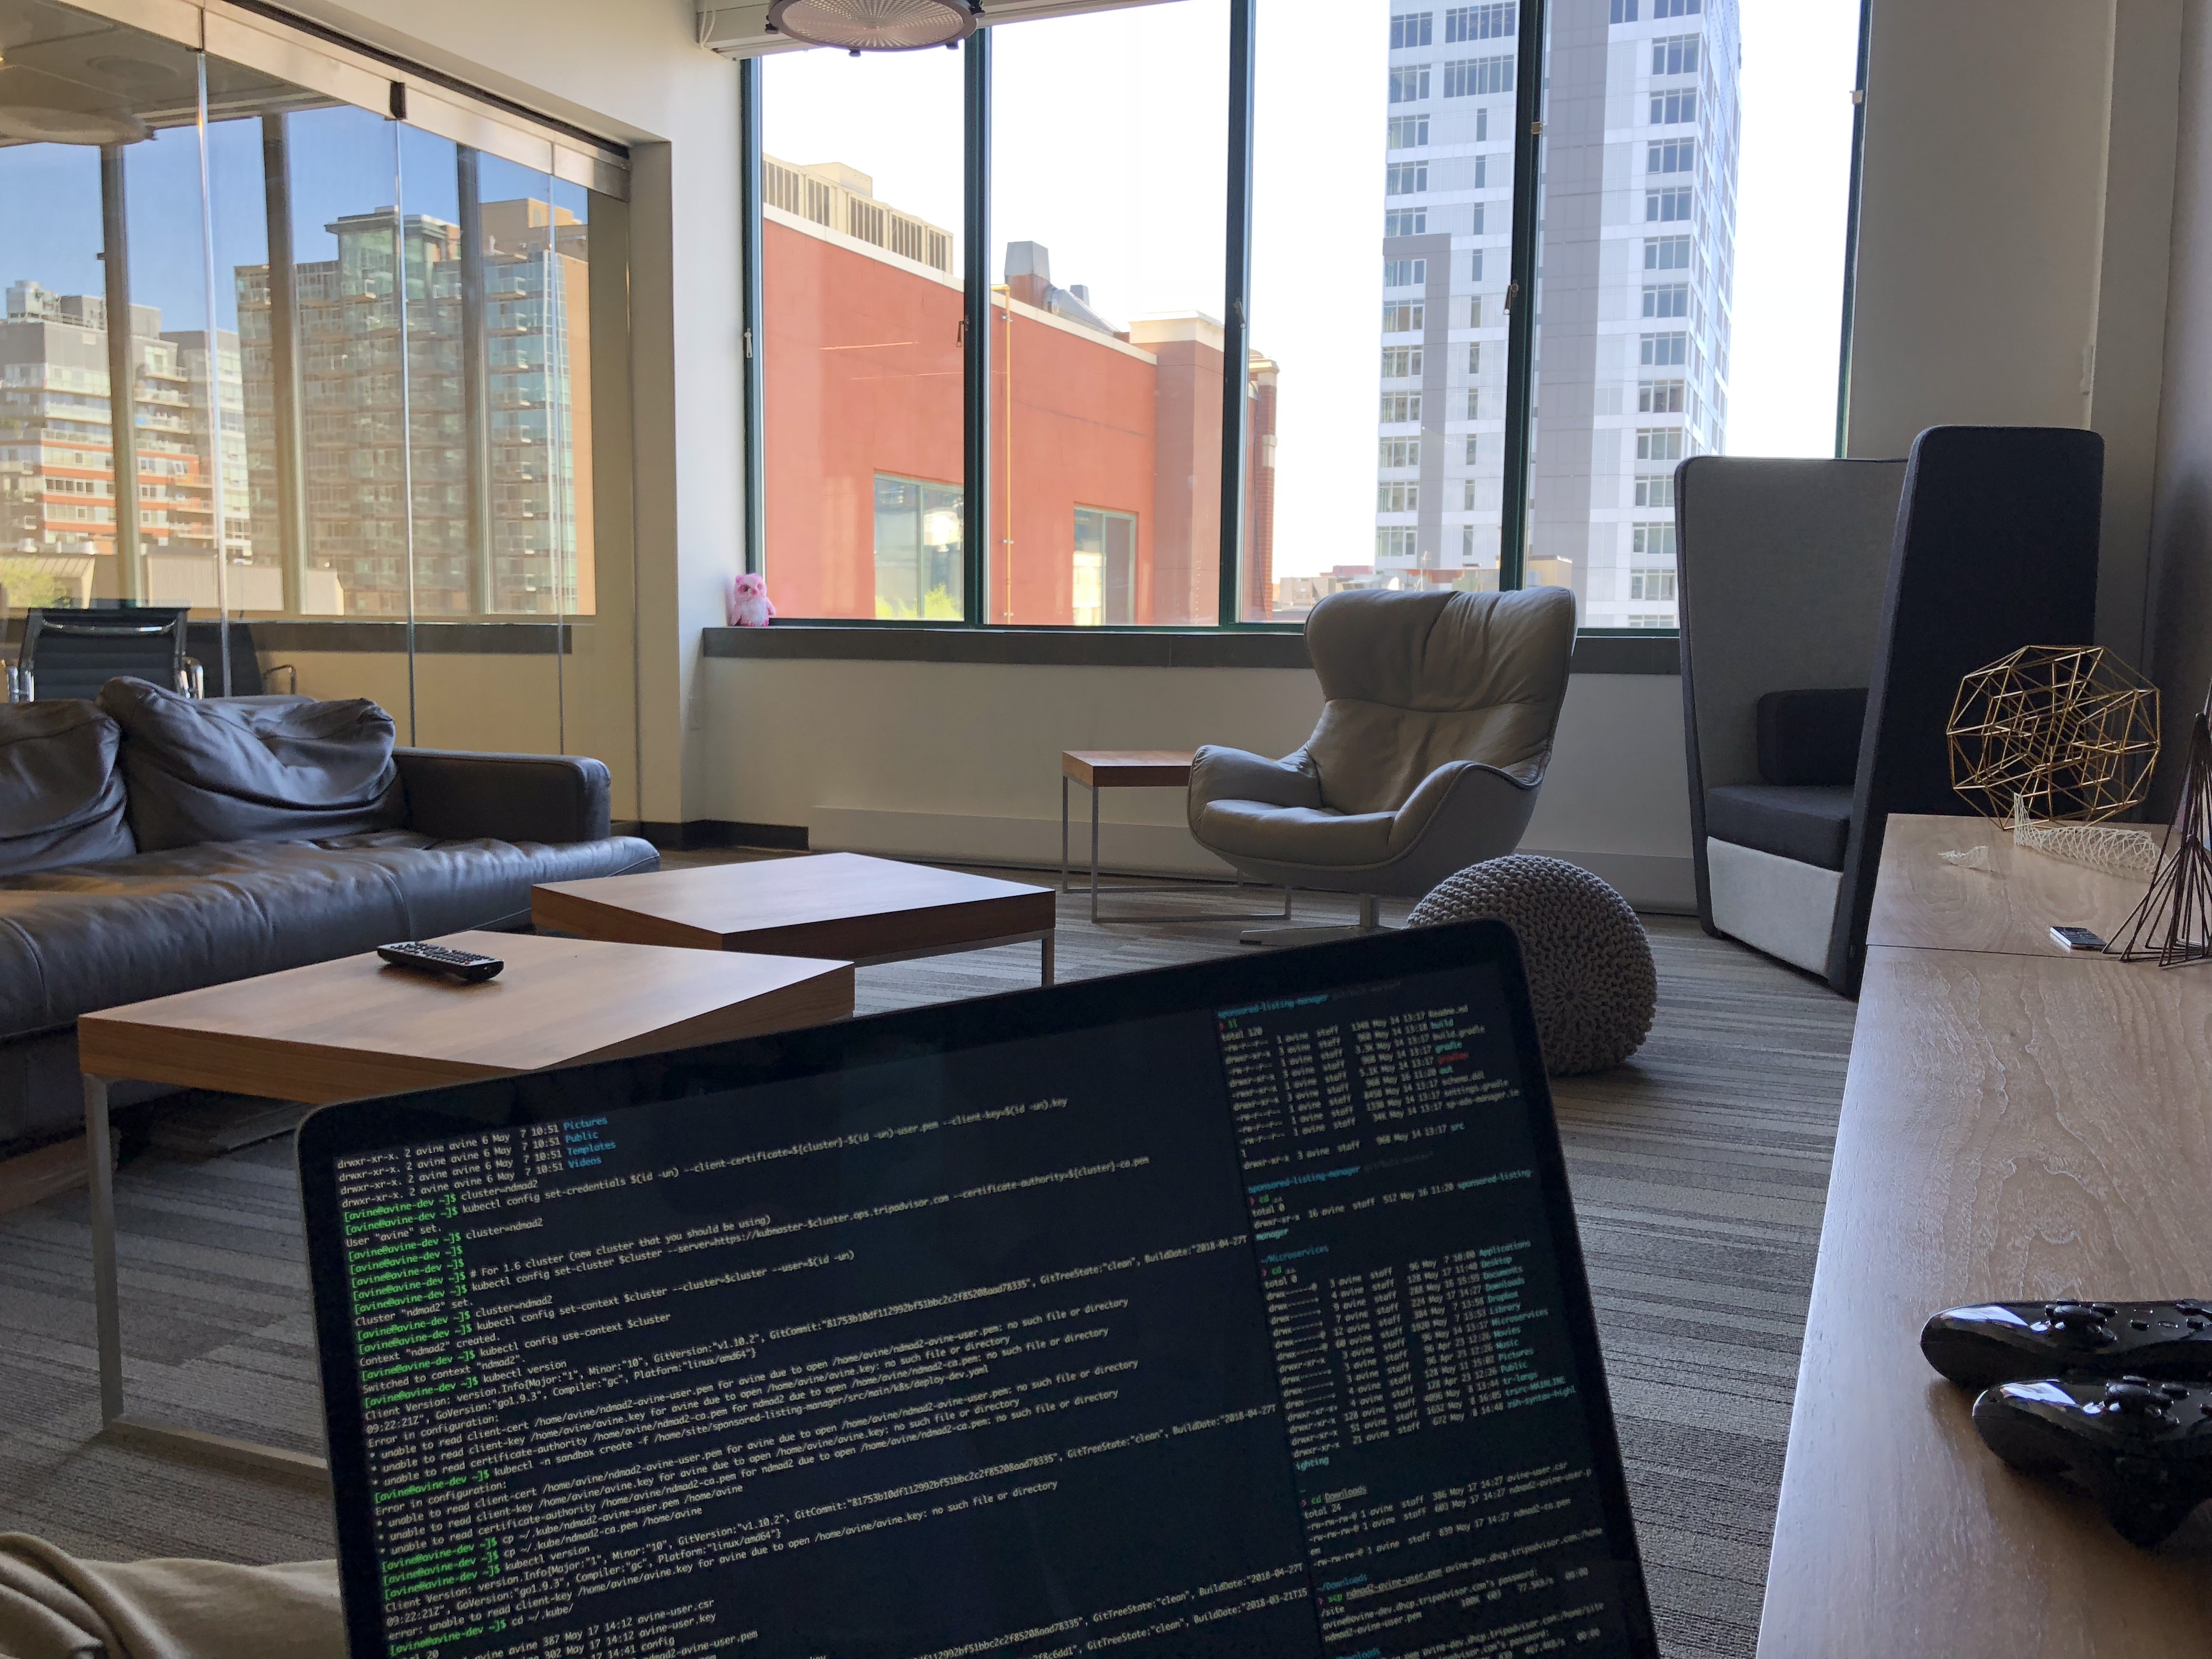 A POV shot of the lounge area of the TripAdivsor Canada building, looking over a laptop displaying code